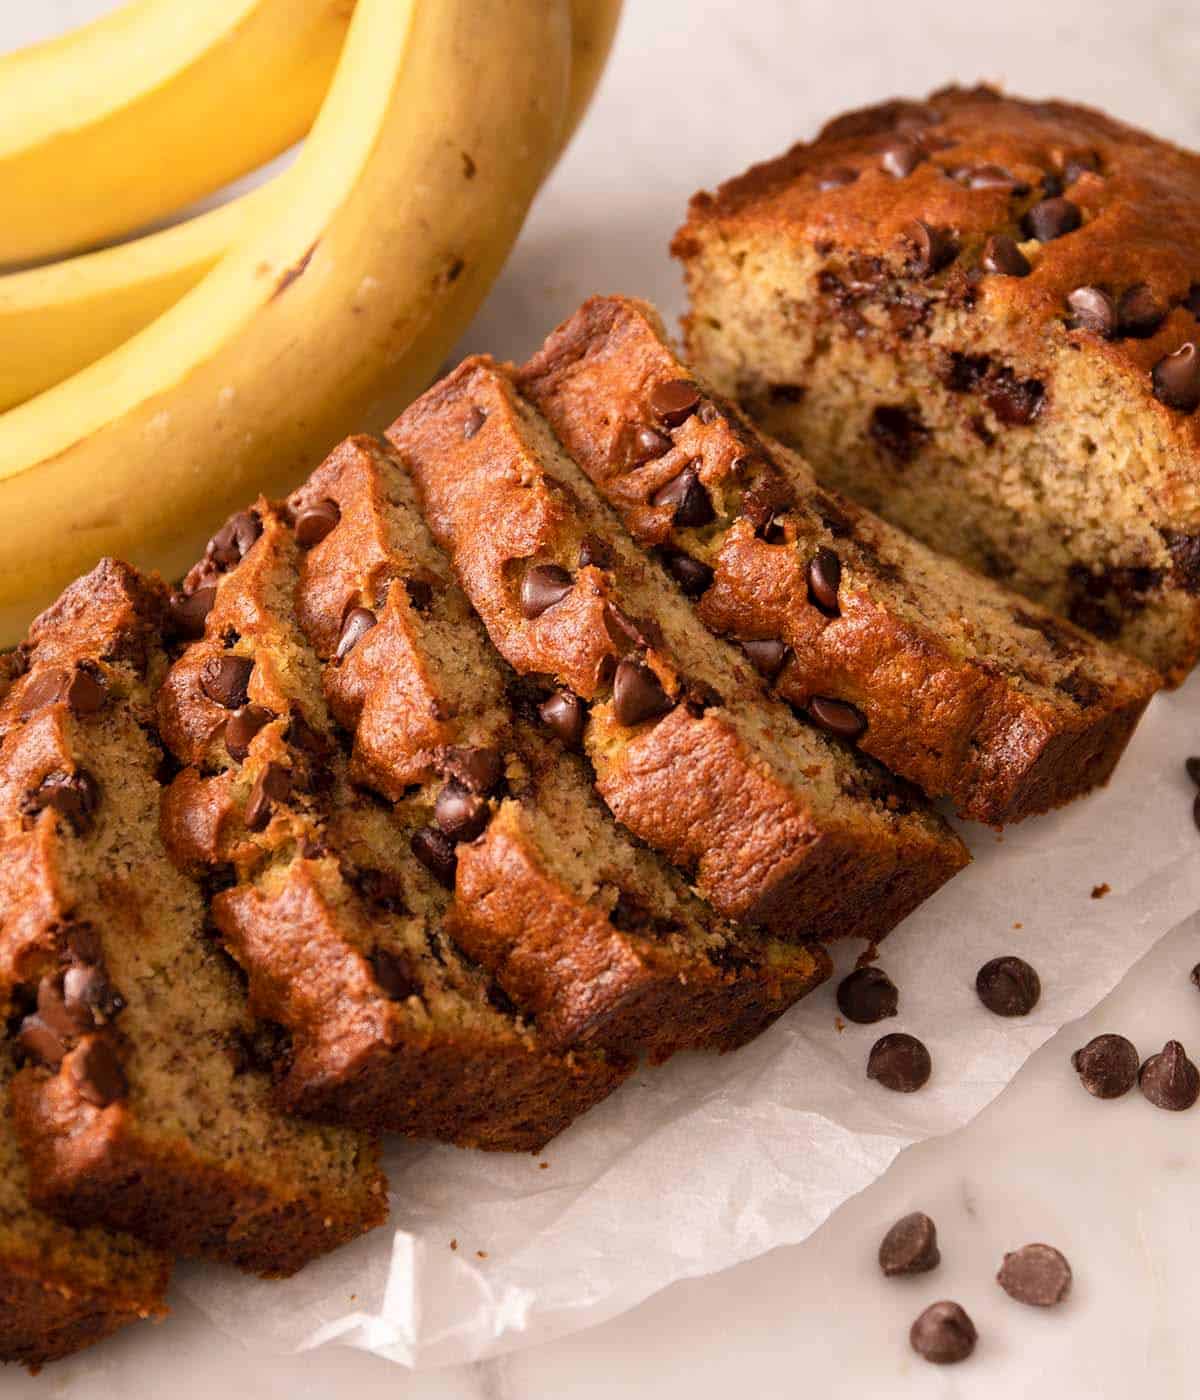 Chocolate chip banana bread cut into slices.